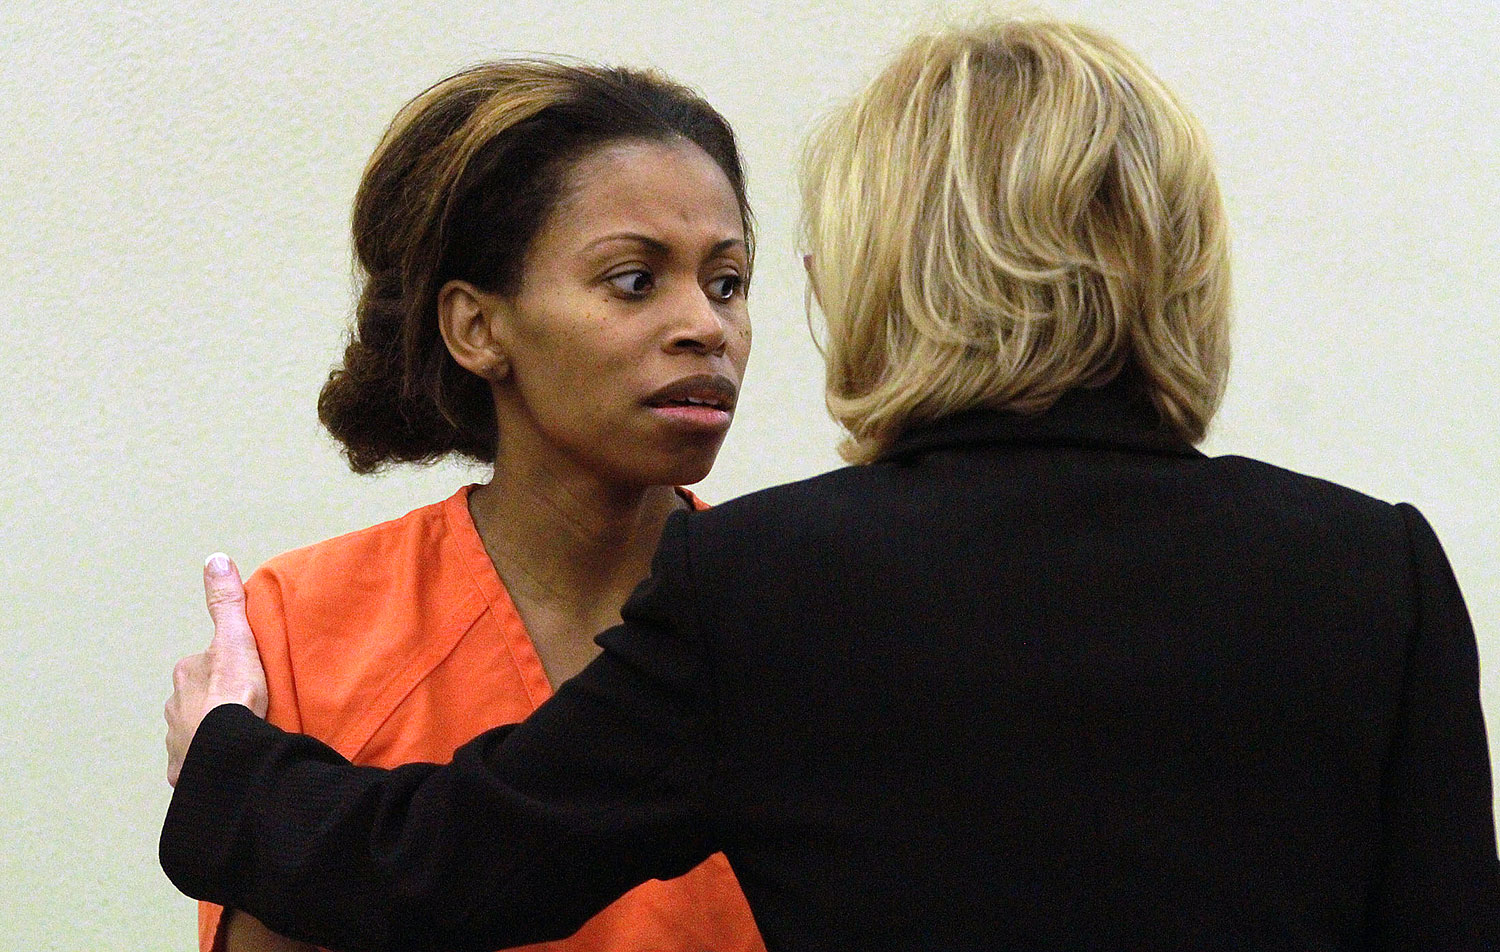 Ebony Wilkerson, left, talks to her assistant public defender Nora Hall during her first appearance before a Volusia County Court Judge, Saturday, March 8, 2014, in Daytona Beach, Fla. (Jim Tiller—AP)